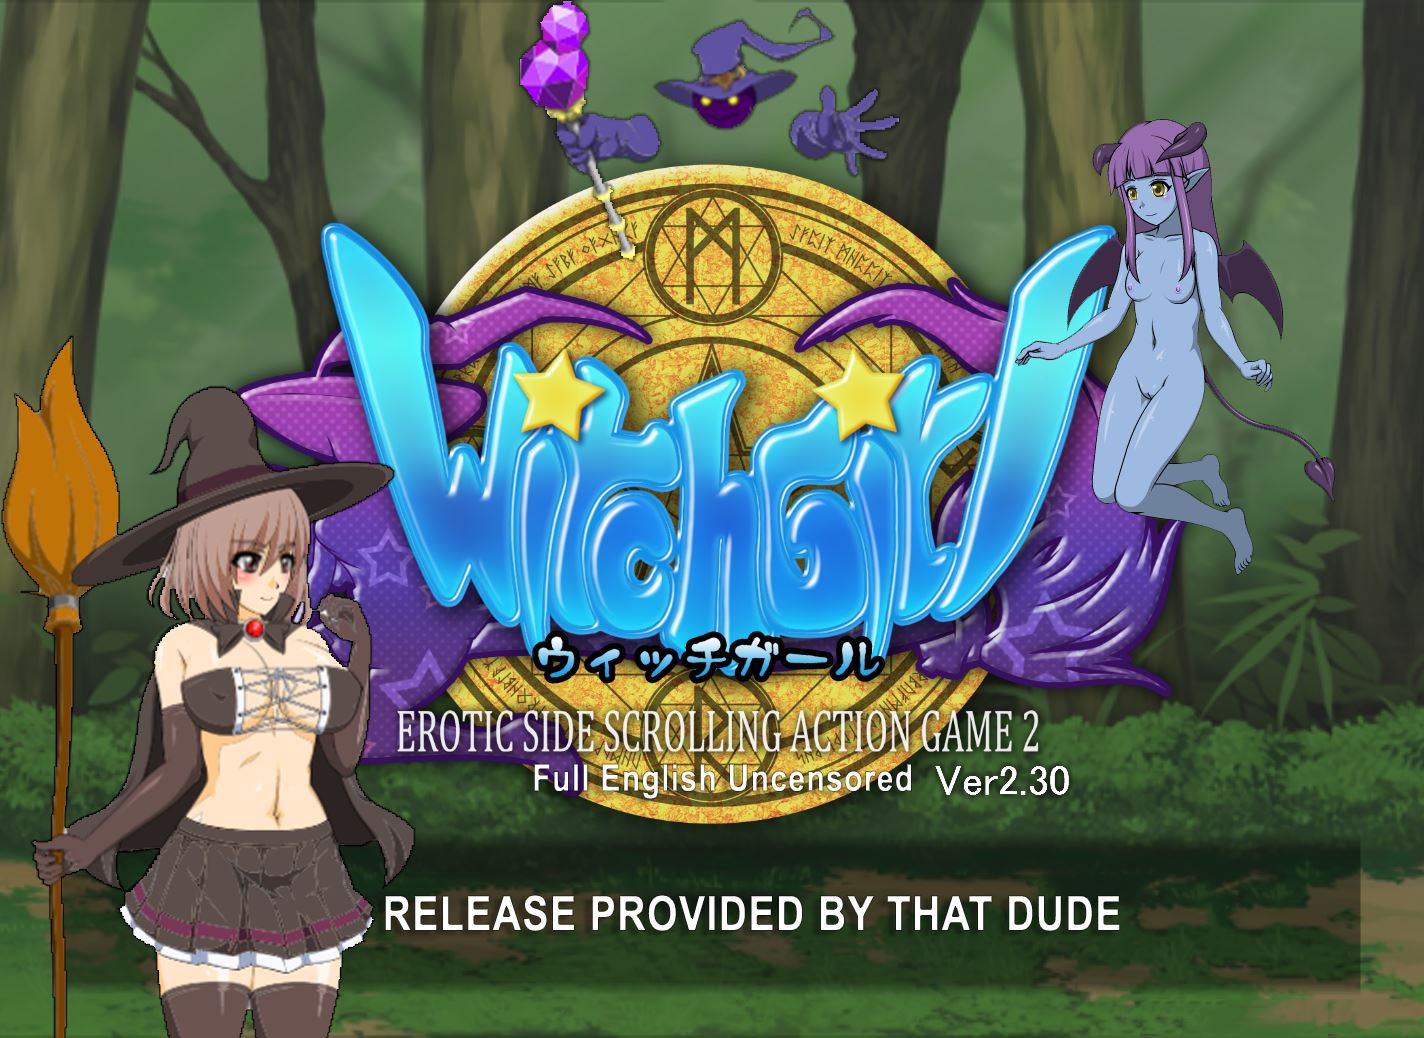 Xxwwn Girl Com Donload - Witch Girl Flash Porn Sex Game v.2.34 Download for Windows